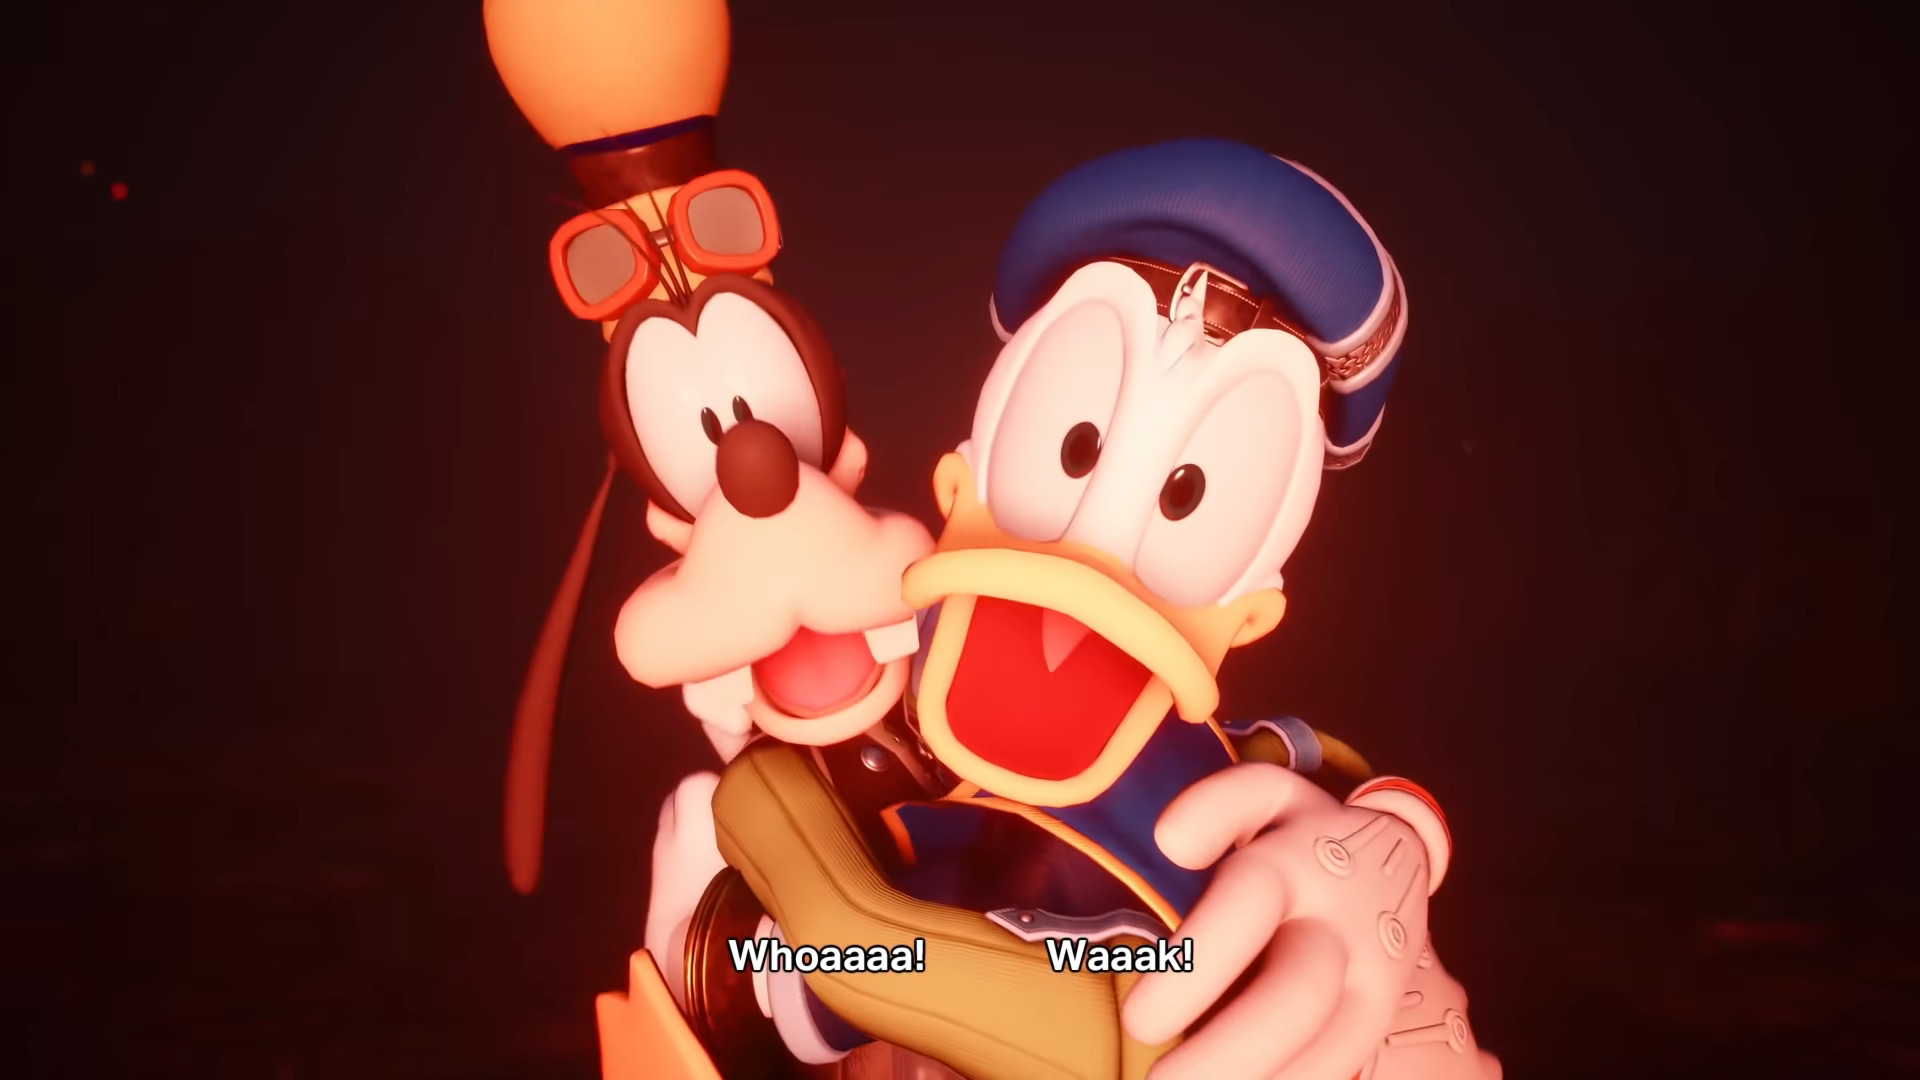 Goofy (Bill Farmer) and Donald Duck (Tony Anselmo) are in over their heads in Kingdom Hearts IV (TBD), Square Enix